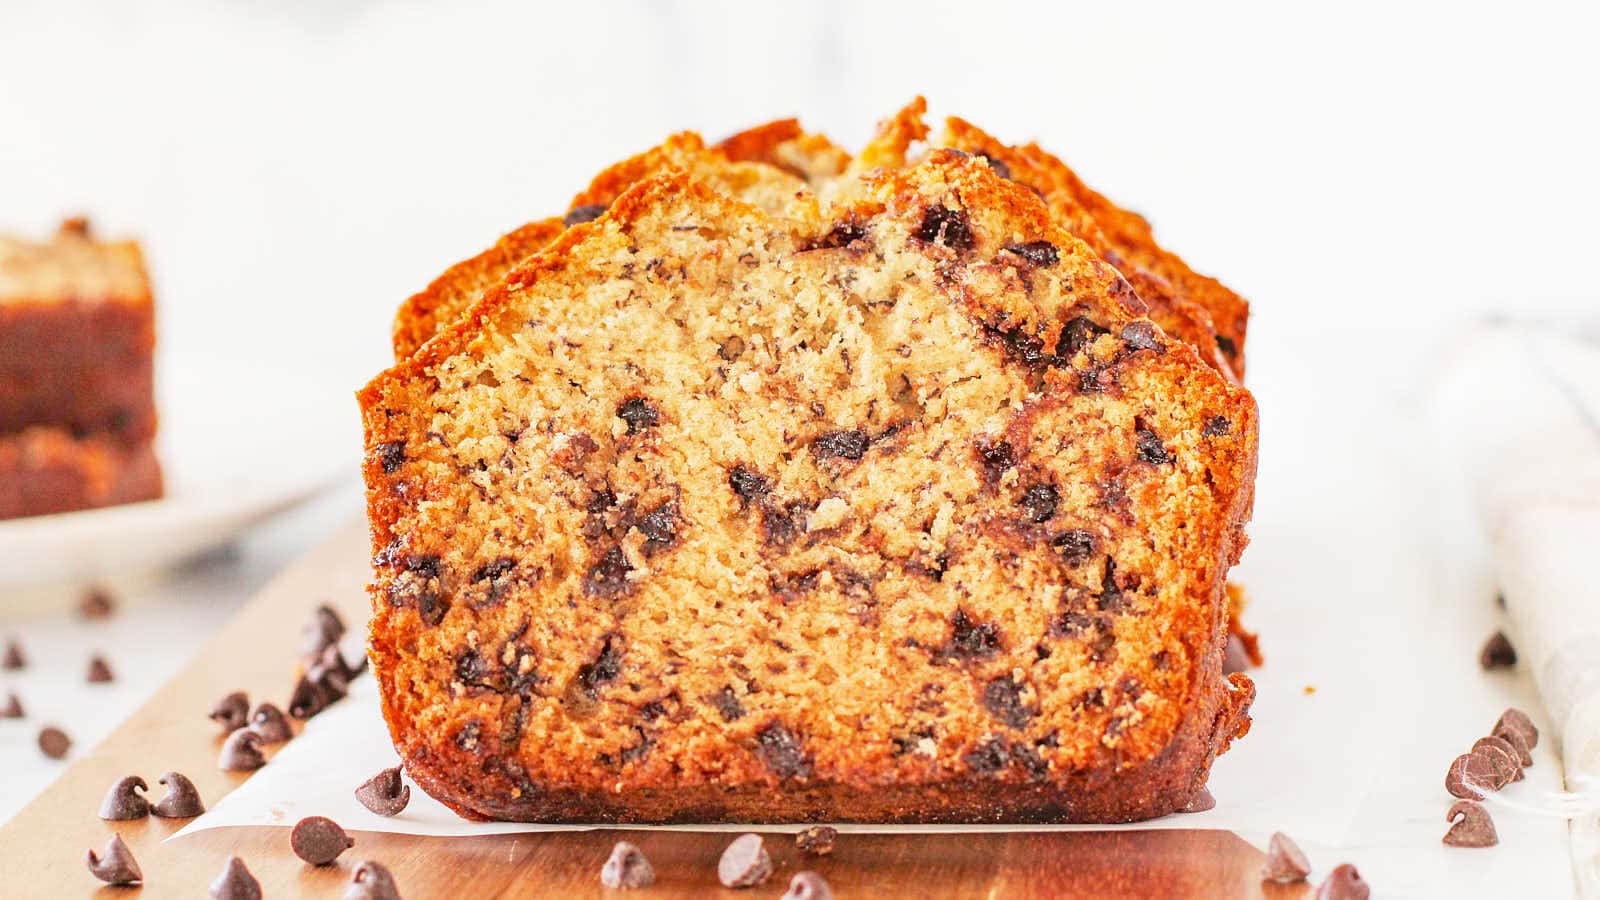 Chocolate Chip Banana Bread recipe by Cheerful Cook.